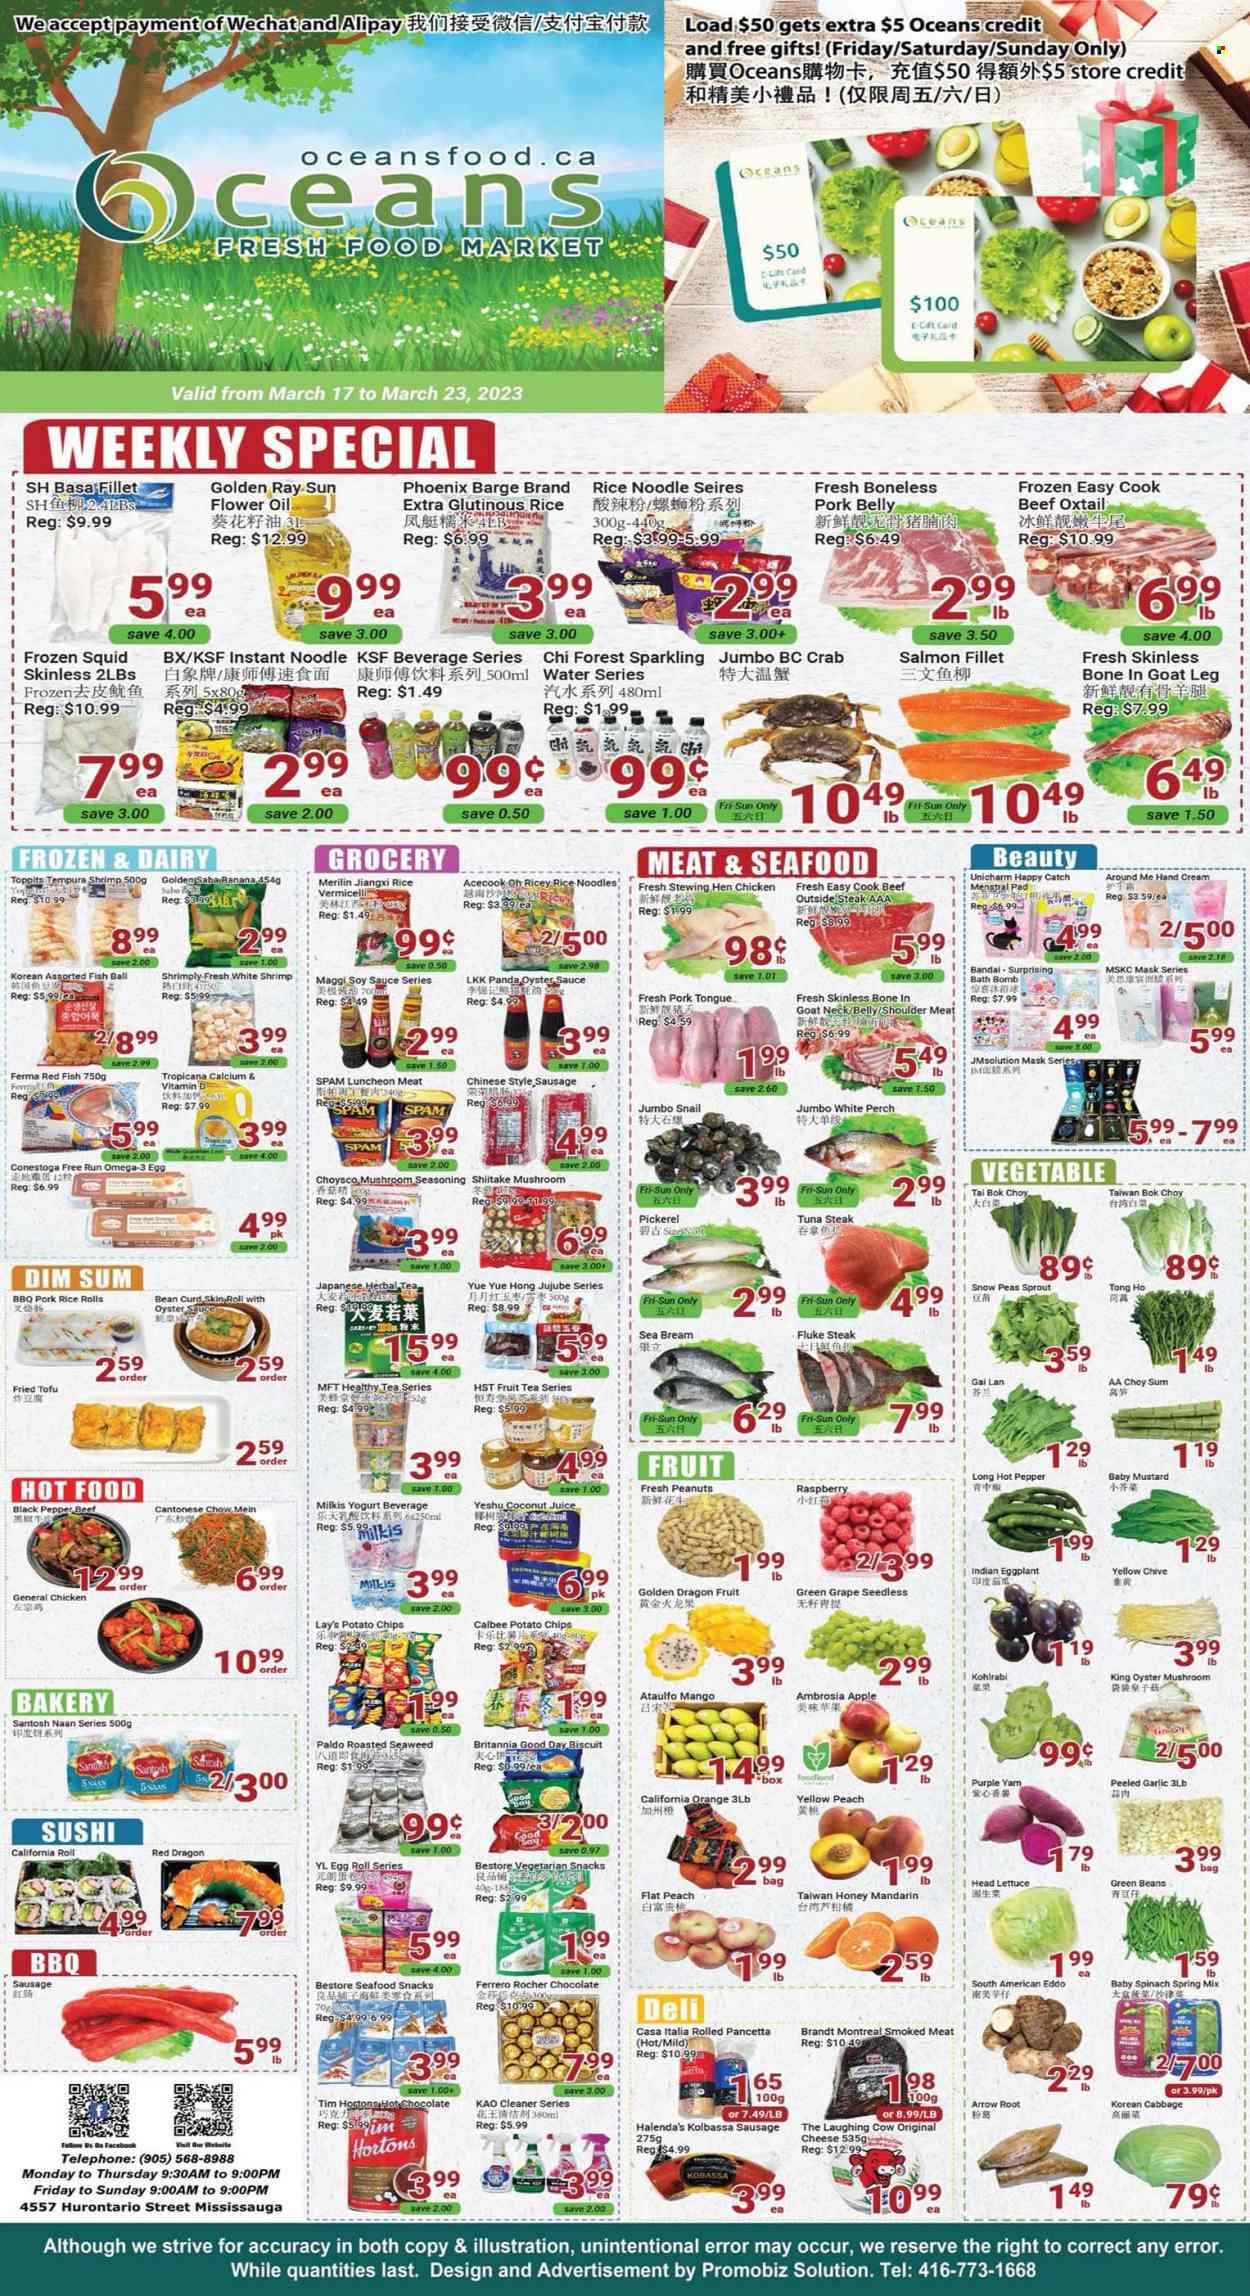 thumbnail - Oceans Flyer - March 17, 2023 - March 23, 2023 - Sales products - oyster mushrooms, mushrooms, beans, bok choy, cabbage, garlic, green beans, spinach, peas, lettuce, eggplant, mandarines, mango, jujube, oranges, dragon fruit, salmon, salmon fillet, squid, tuna, perch, oysters, seafood, crab, seabream, shrimps, walleye, sauce, egg rolls, noodles, sausage, Spam, lunch meat, The Laughing Cow, curd, tofu, yoghurt, snow peas, snack, biscuit, potato chips, Lay’s, seaweed, Maggi, tuna steak, rice vermicelli, black pepper, spice, mustard, soy sauce, oyster sauce, oil, honey, peanuts, juice, water, hot chocolate, tea, herbal tea, chicken, beef meat, oxtail, steak, pork belly, pork meat, cleaner, bath bomb, hand cream, Omega-3, calcium, kohlrabi, pancetta, Ferrero Rocher. Page 1.